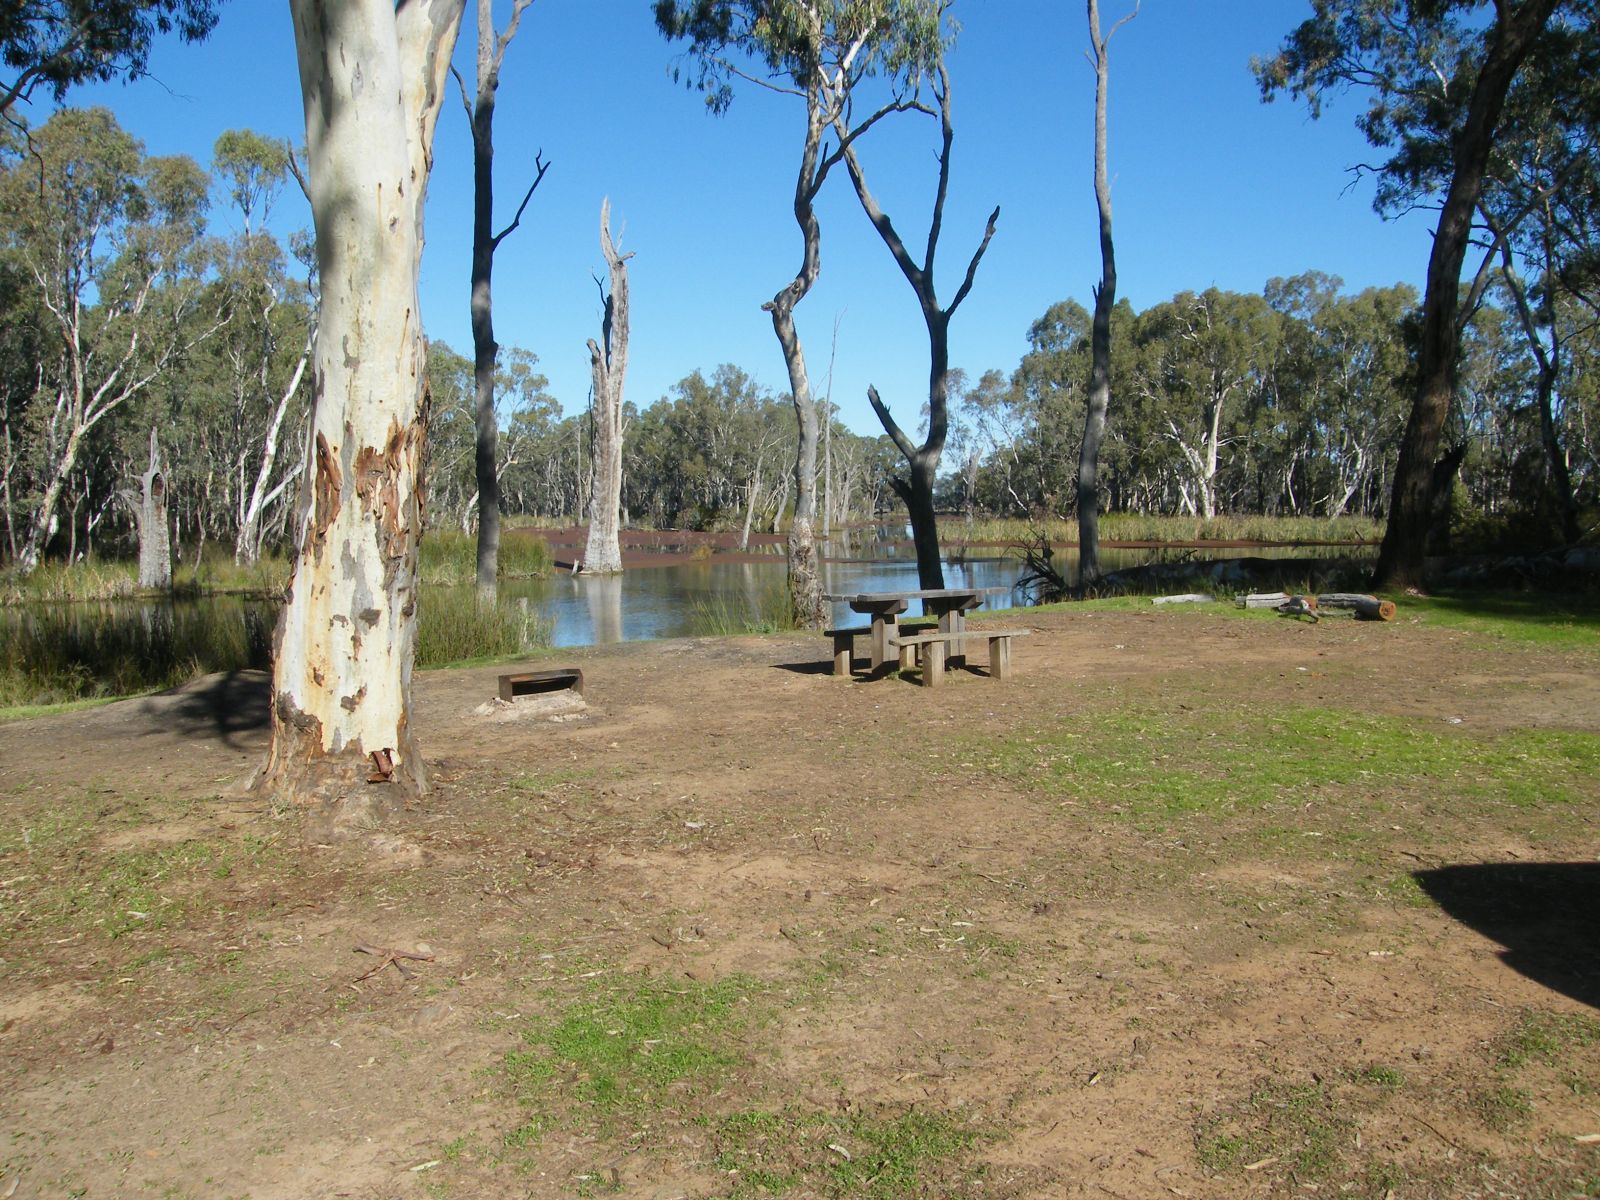 A flat dry dirt area with a picnic table and wood-fired BBQ next to a creek